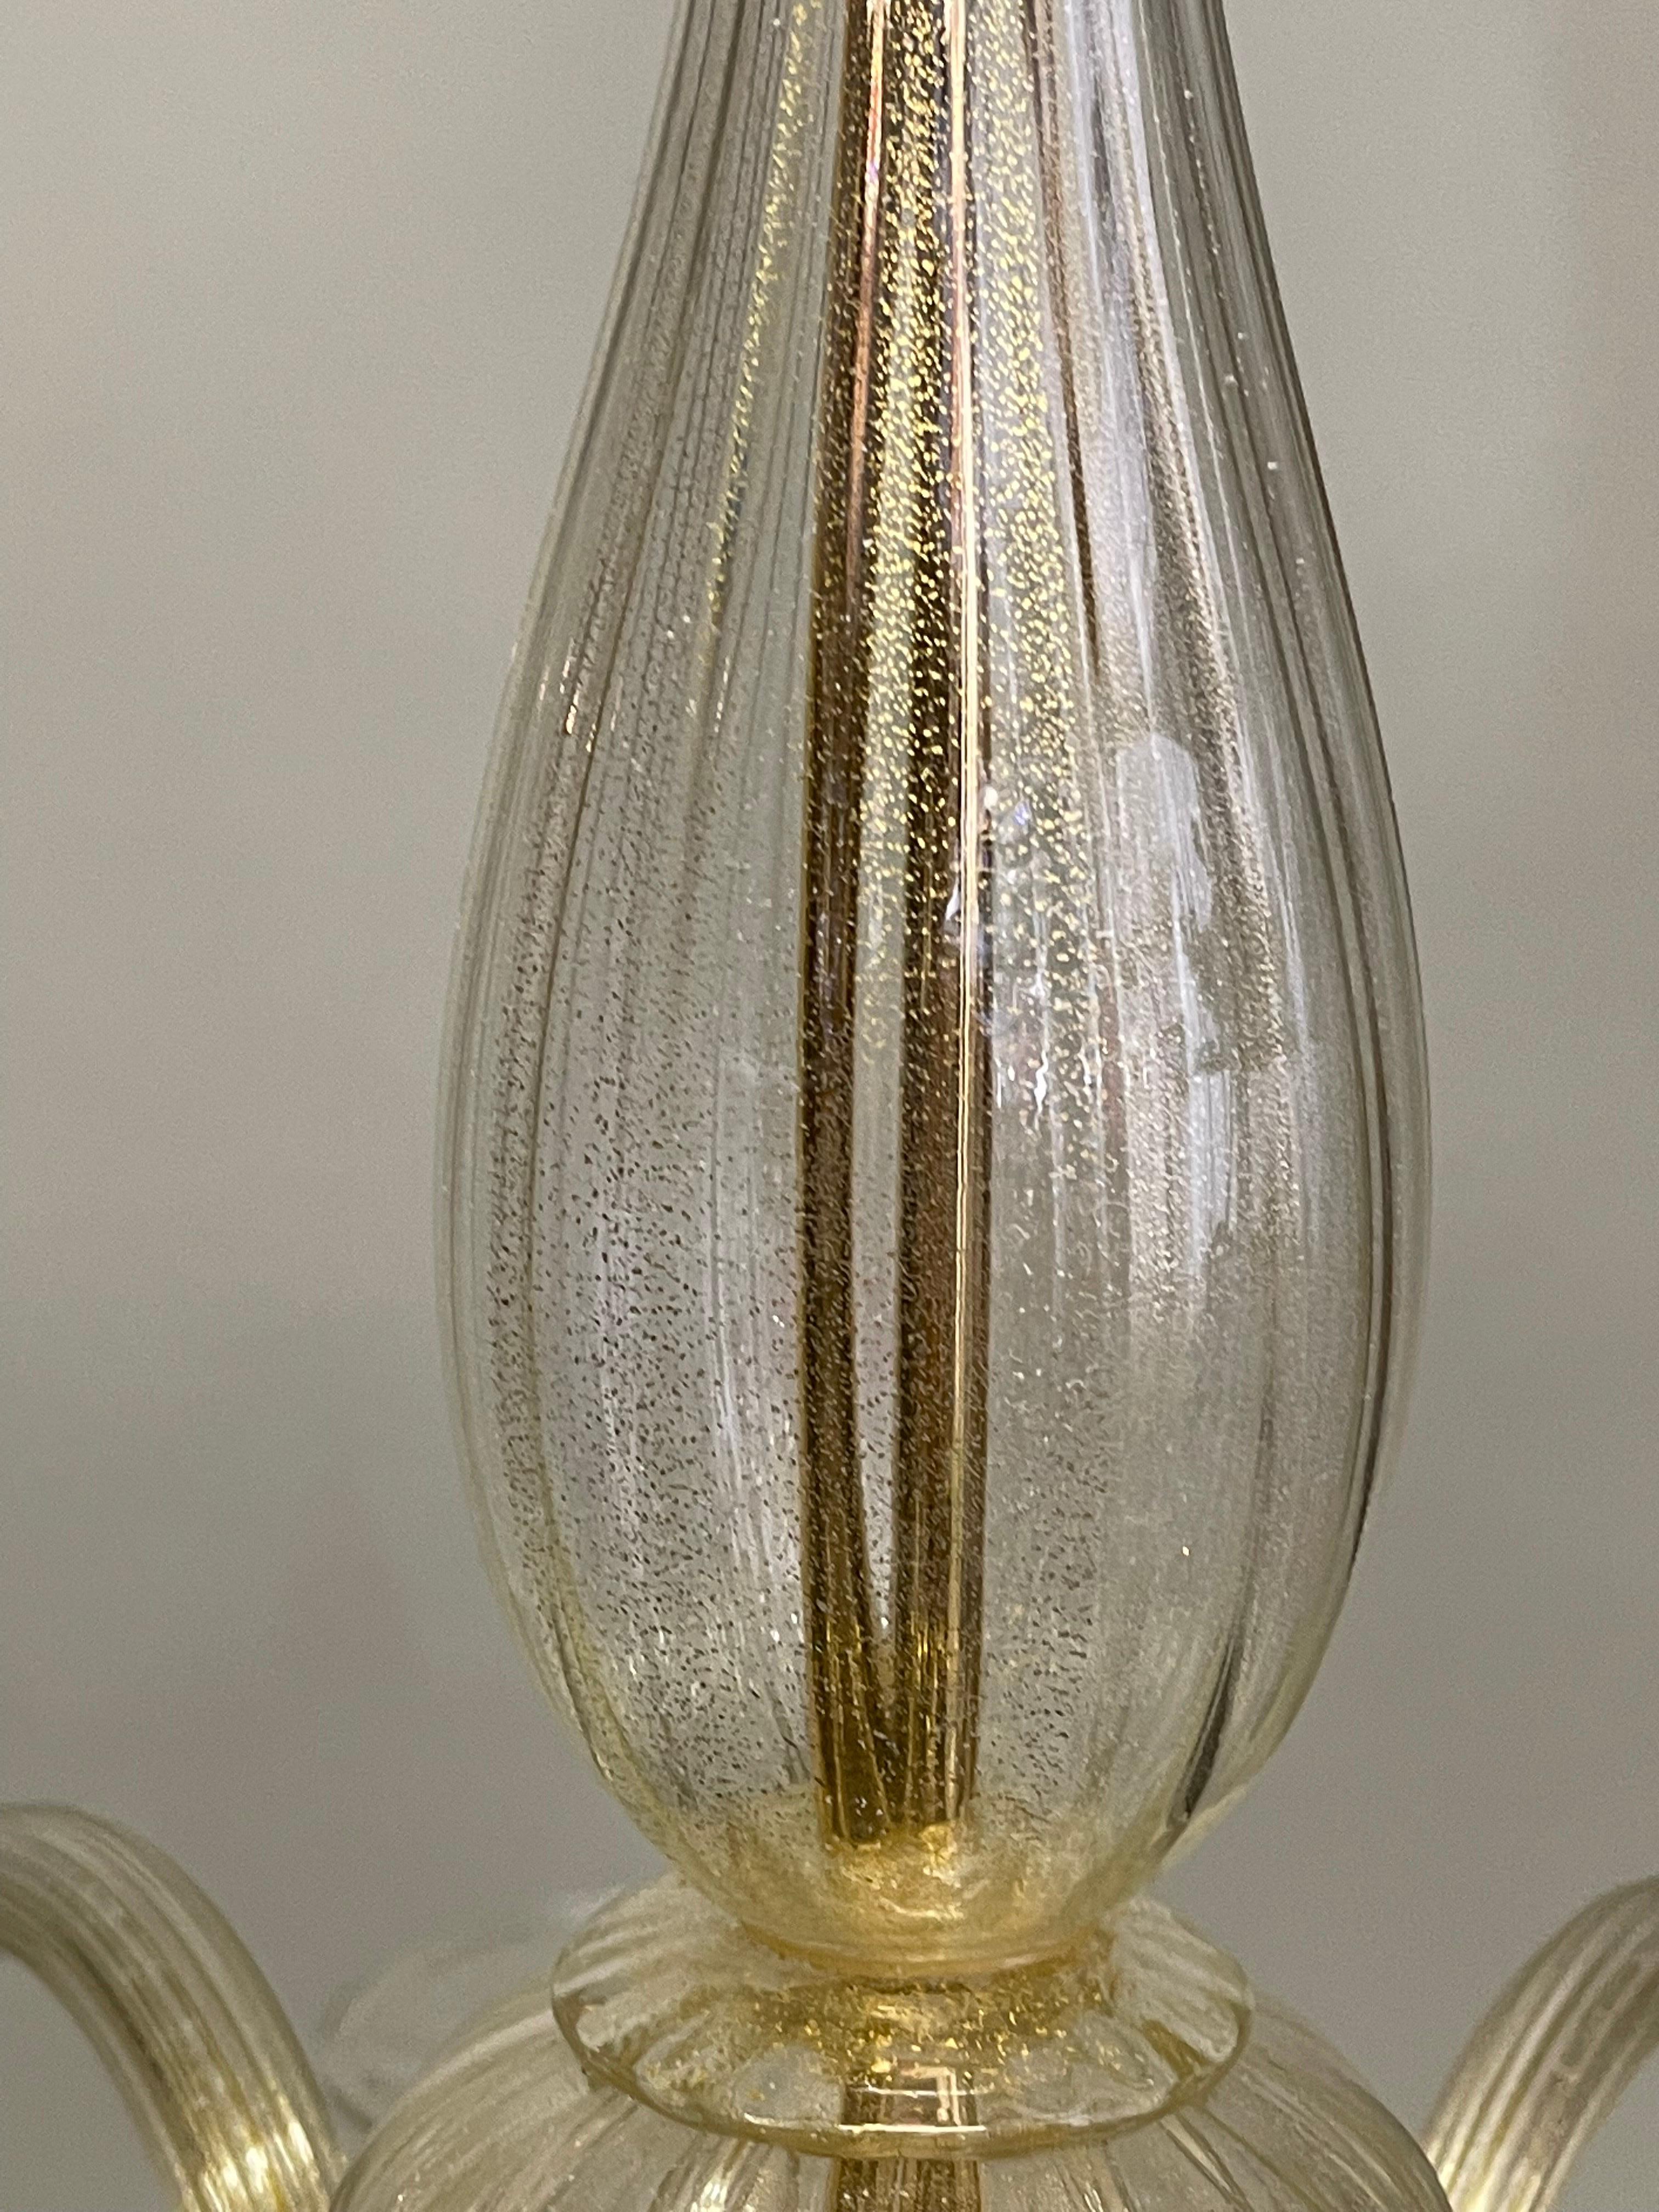 Large Barovier Toso Gold Dusted Murano Glass Chandelier, circa 1960s For Sale 2